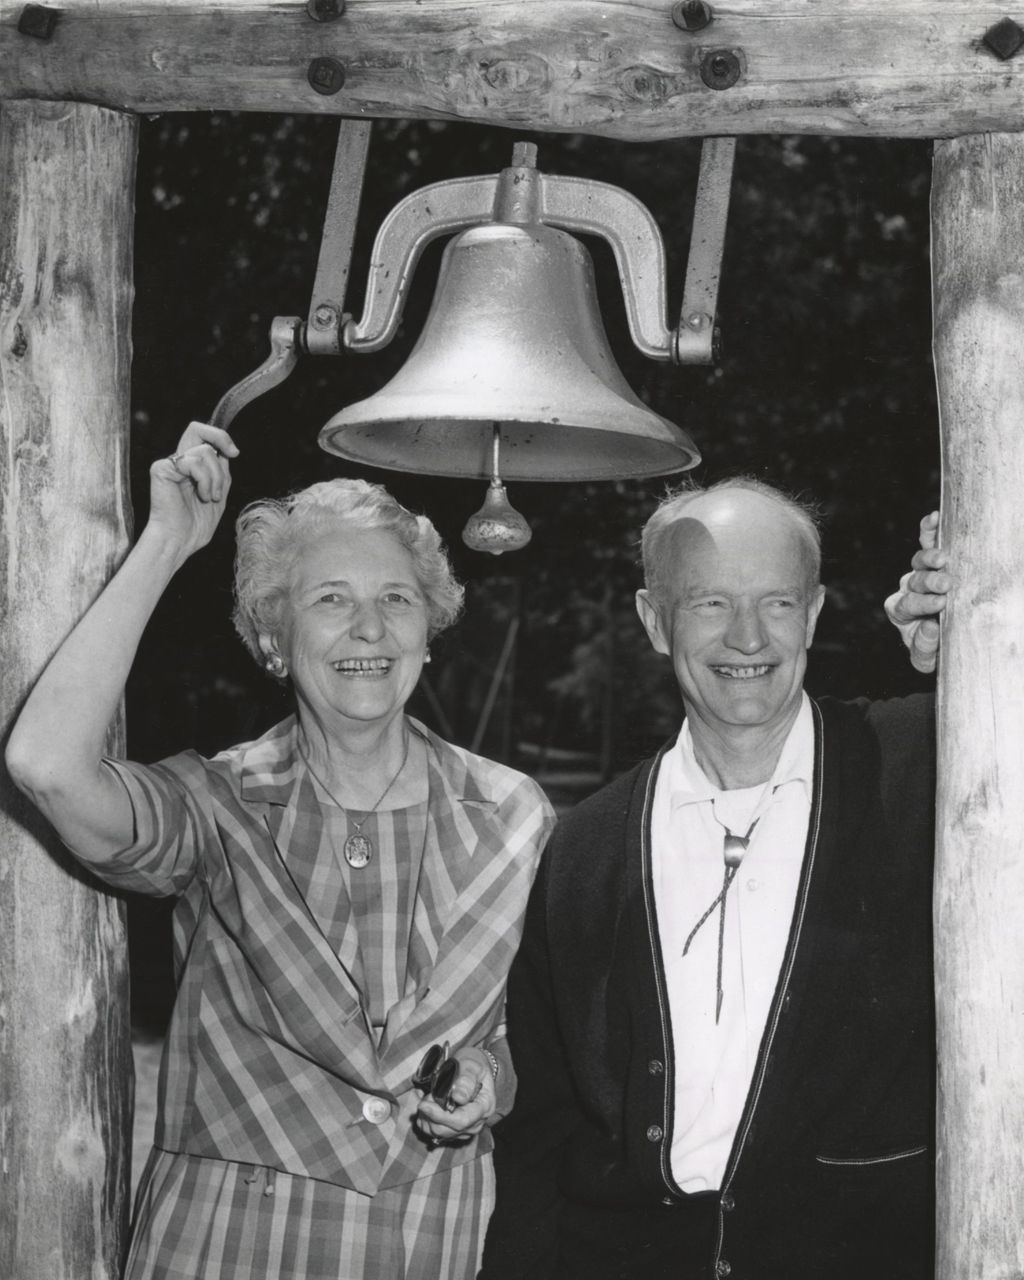 Miniature of Ada Hicks and Robert Hicks, former co-directors of Bowen Country Club, standing under a bell during Bowen Country Club's 50th Anniversary celebration